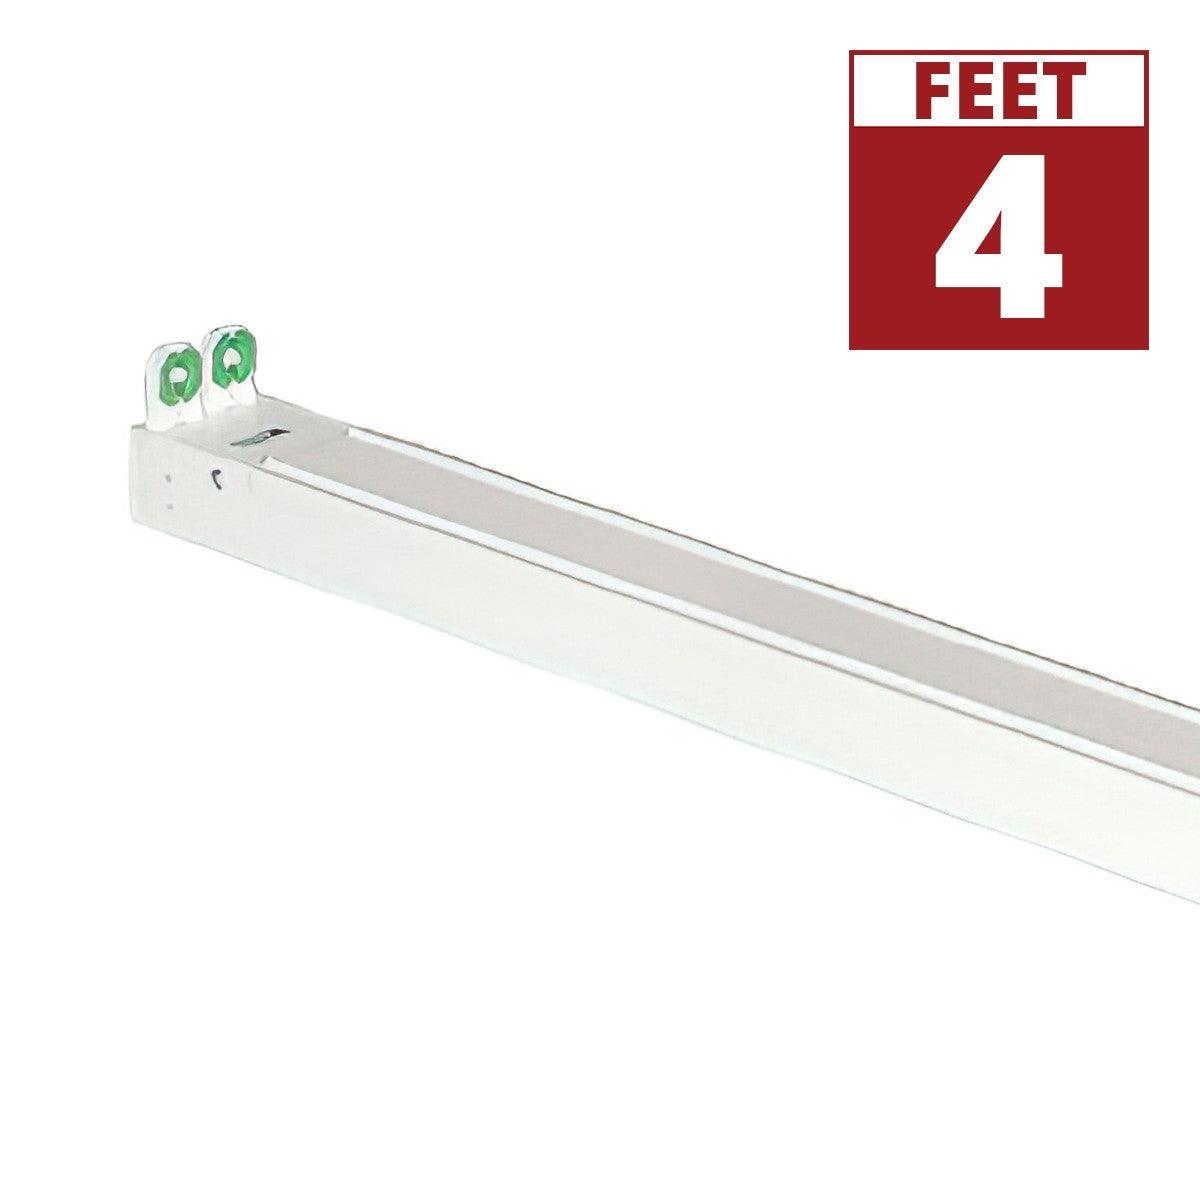 4ft LED Ready Strip Light 2-lamp Double End Wiring LED T5 Bulbs Not Included - Bees Lighting